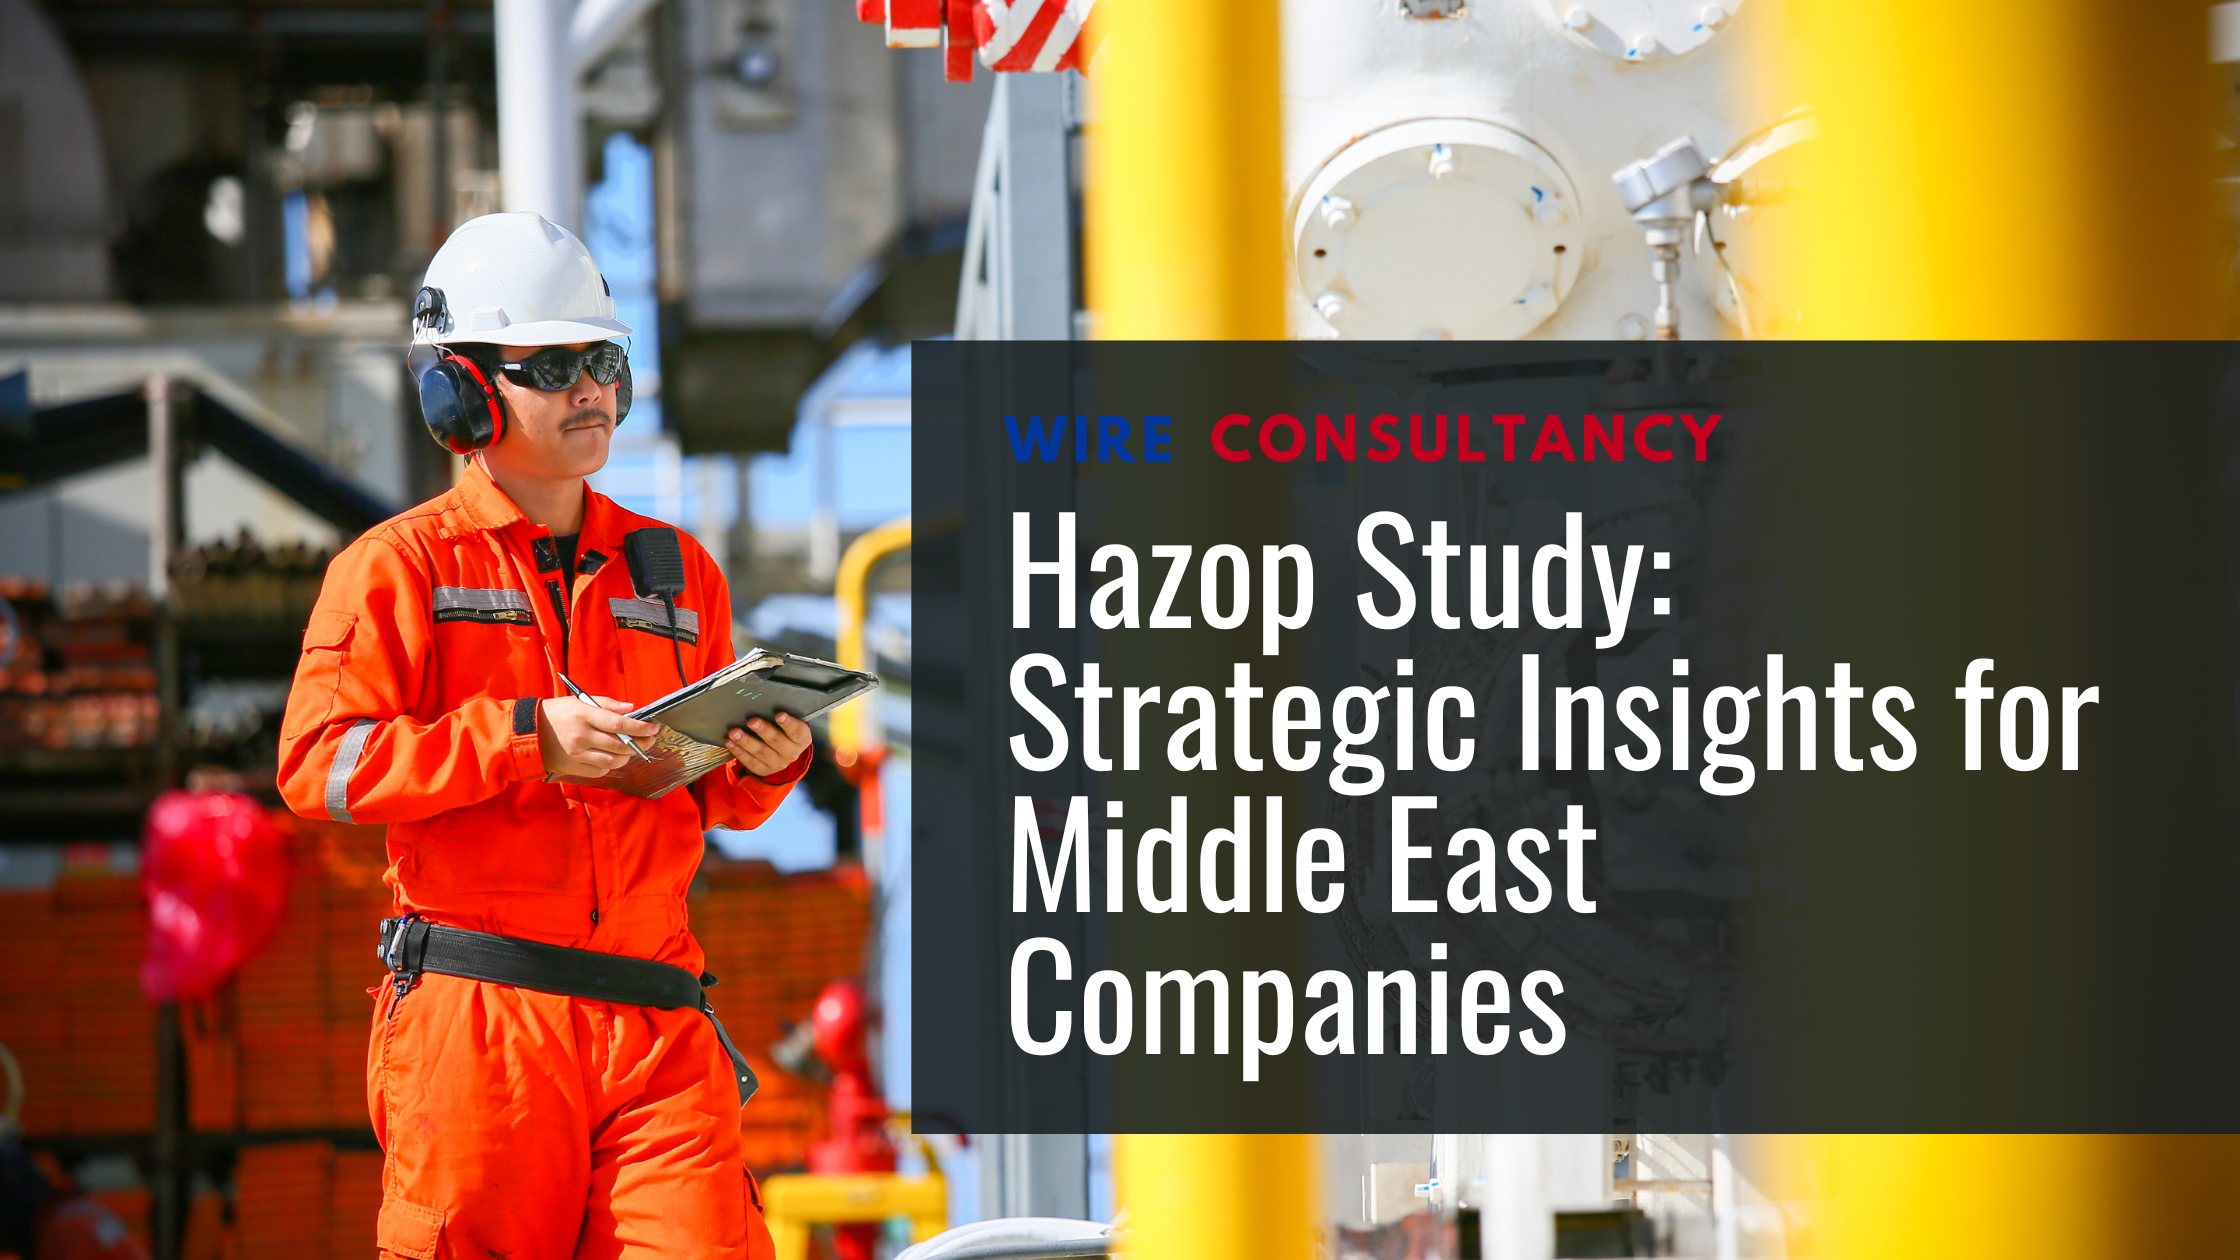 Hazop Study: Strategic Insights for Middle East Companies